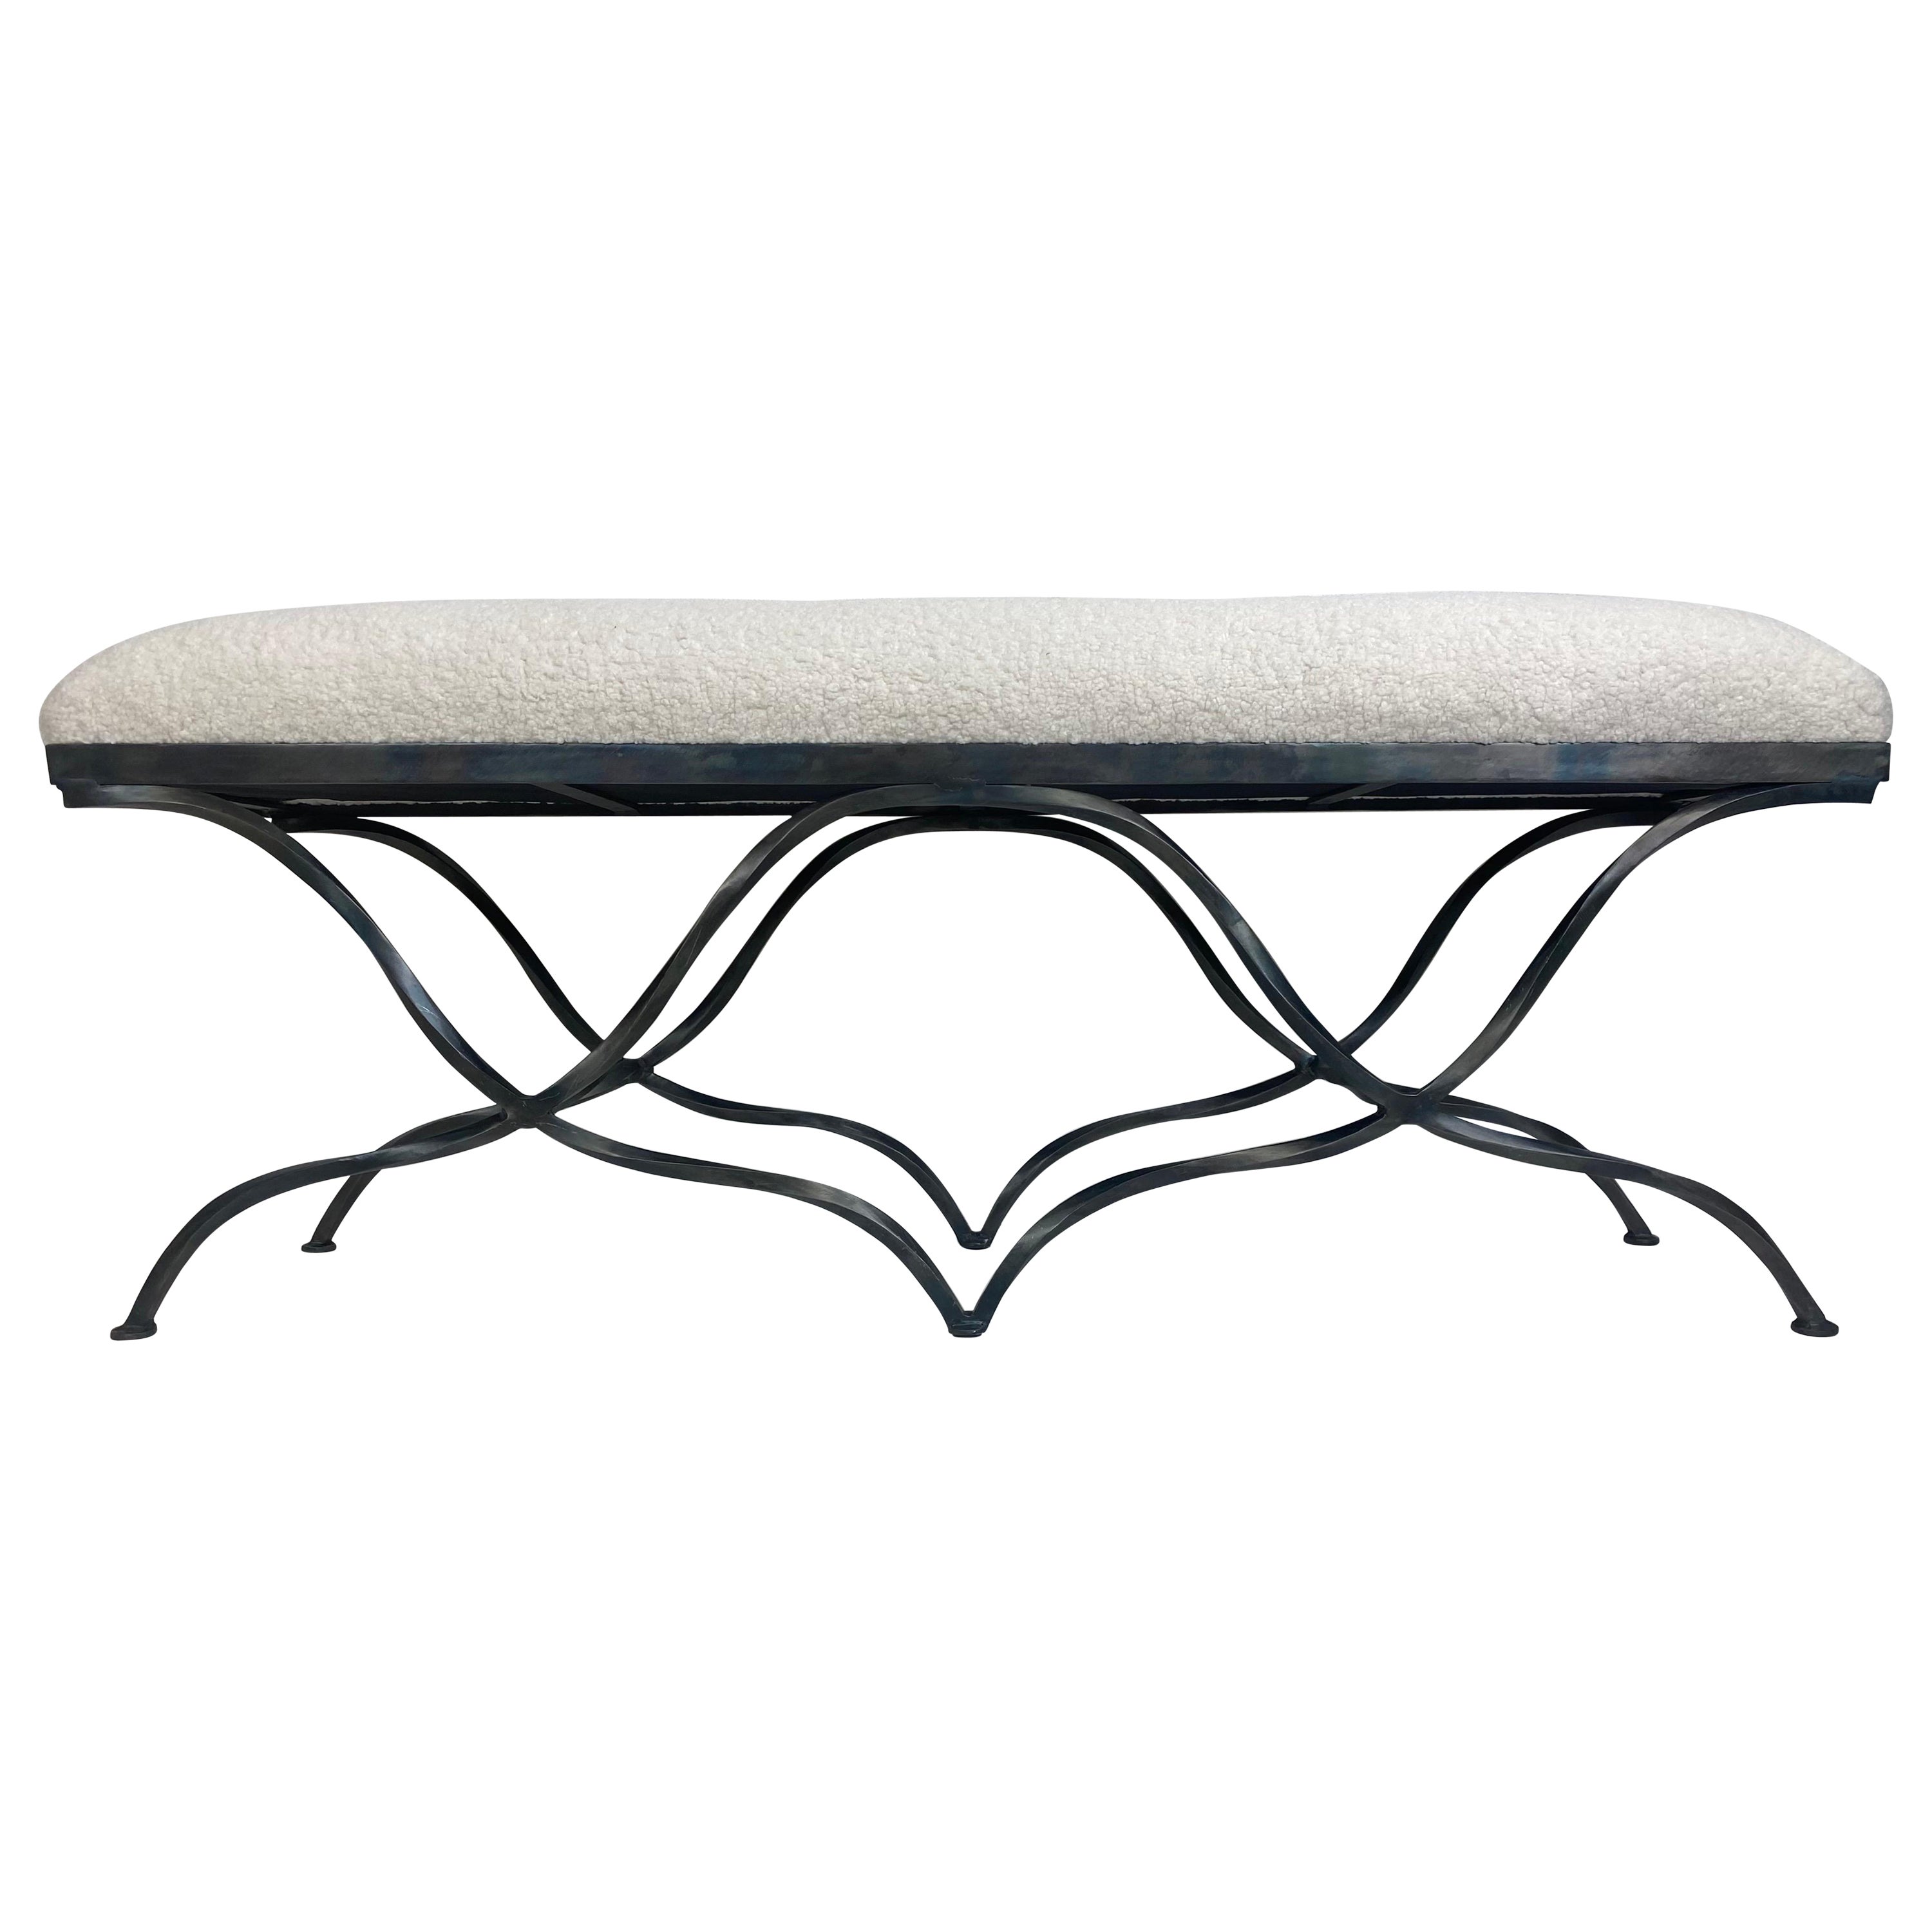 Late 20th century hand wrought iron newly upholstered bench For Sale